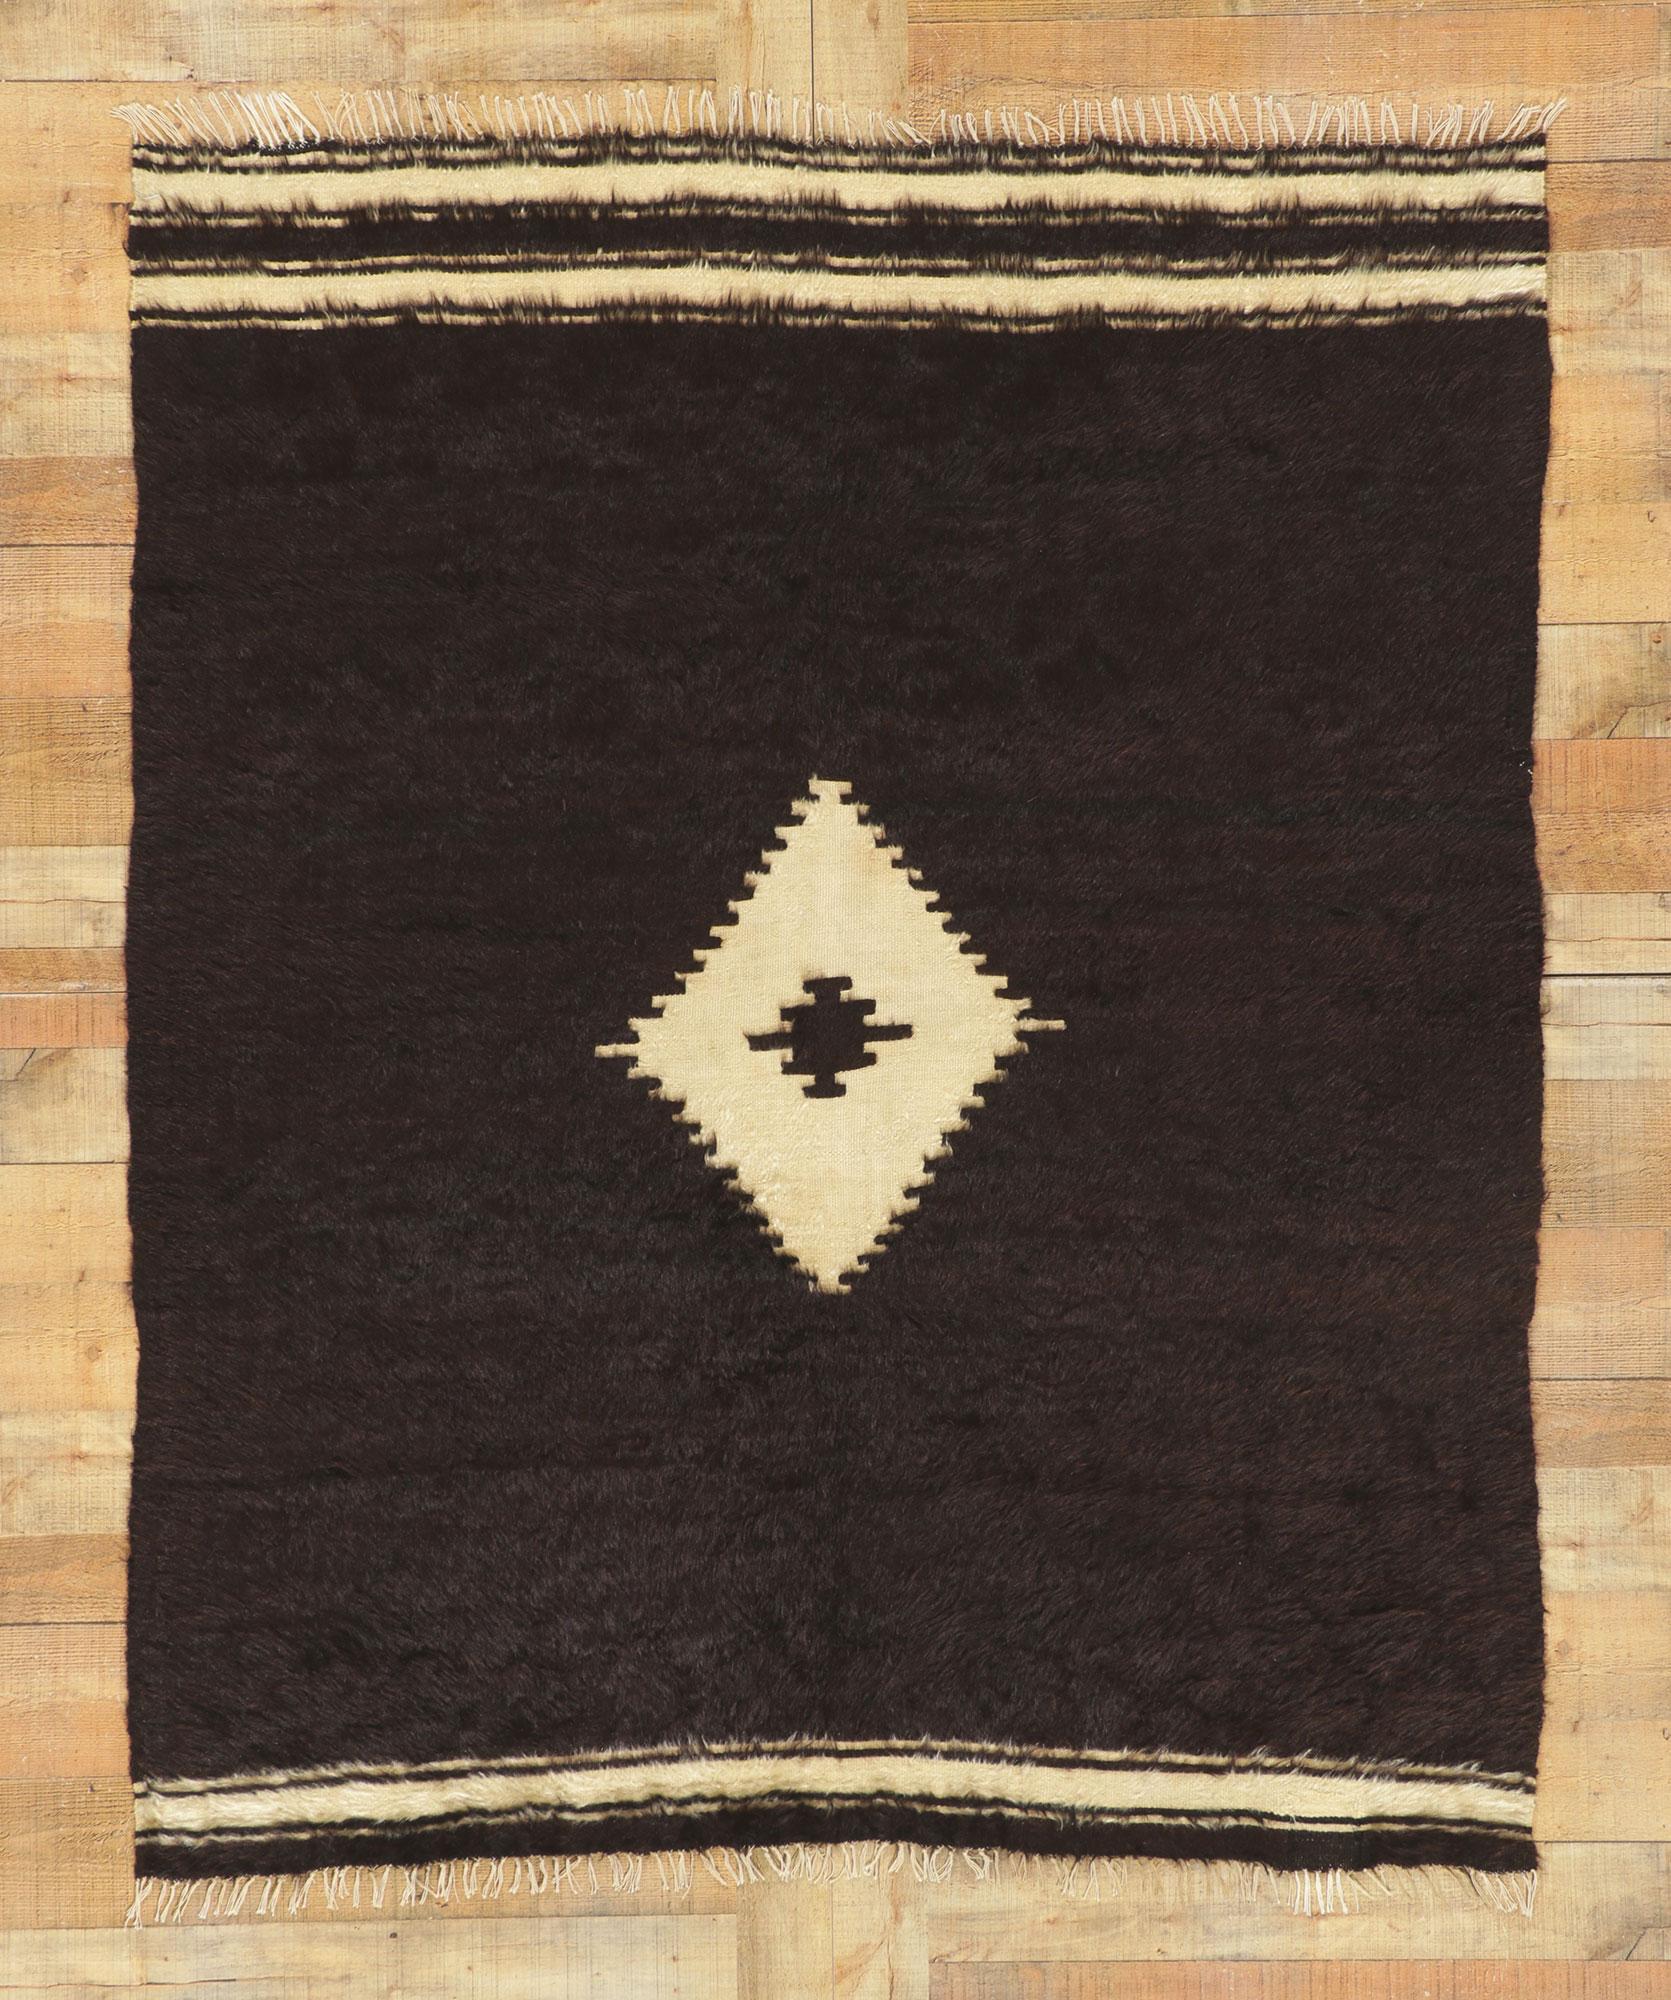 Vintage Turkish Angora Wool Blanket Kilim Rug In Good Condition For Sale In Dallas, TX